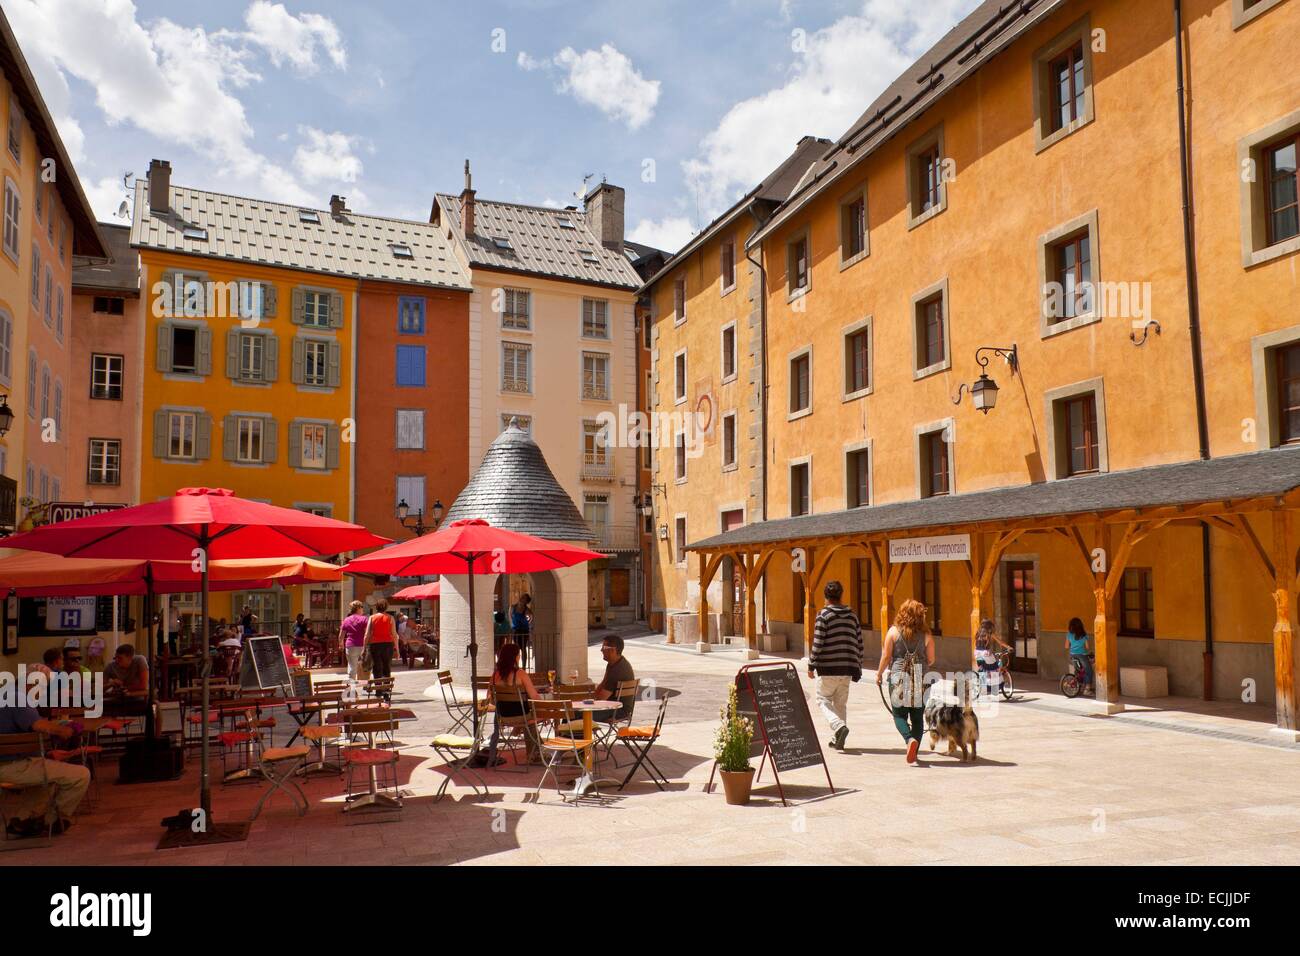 France, Hautes Alpes, Briancon, the parade, Vauban site listed as World Heritage by UNESCO Stock Photo